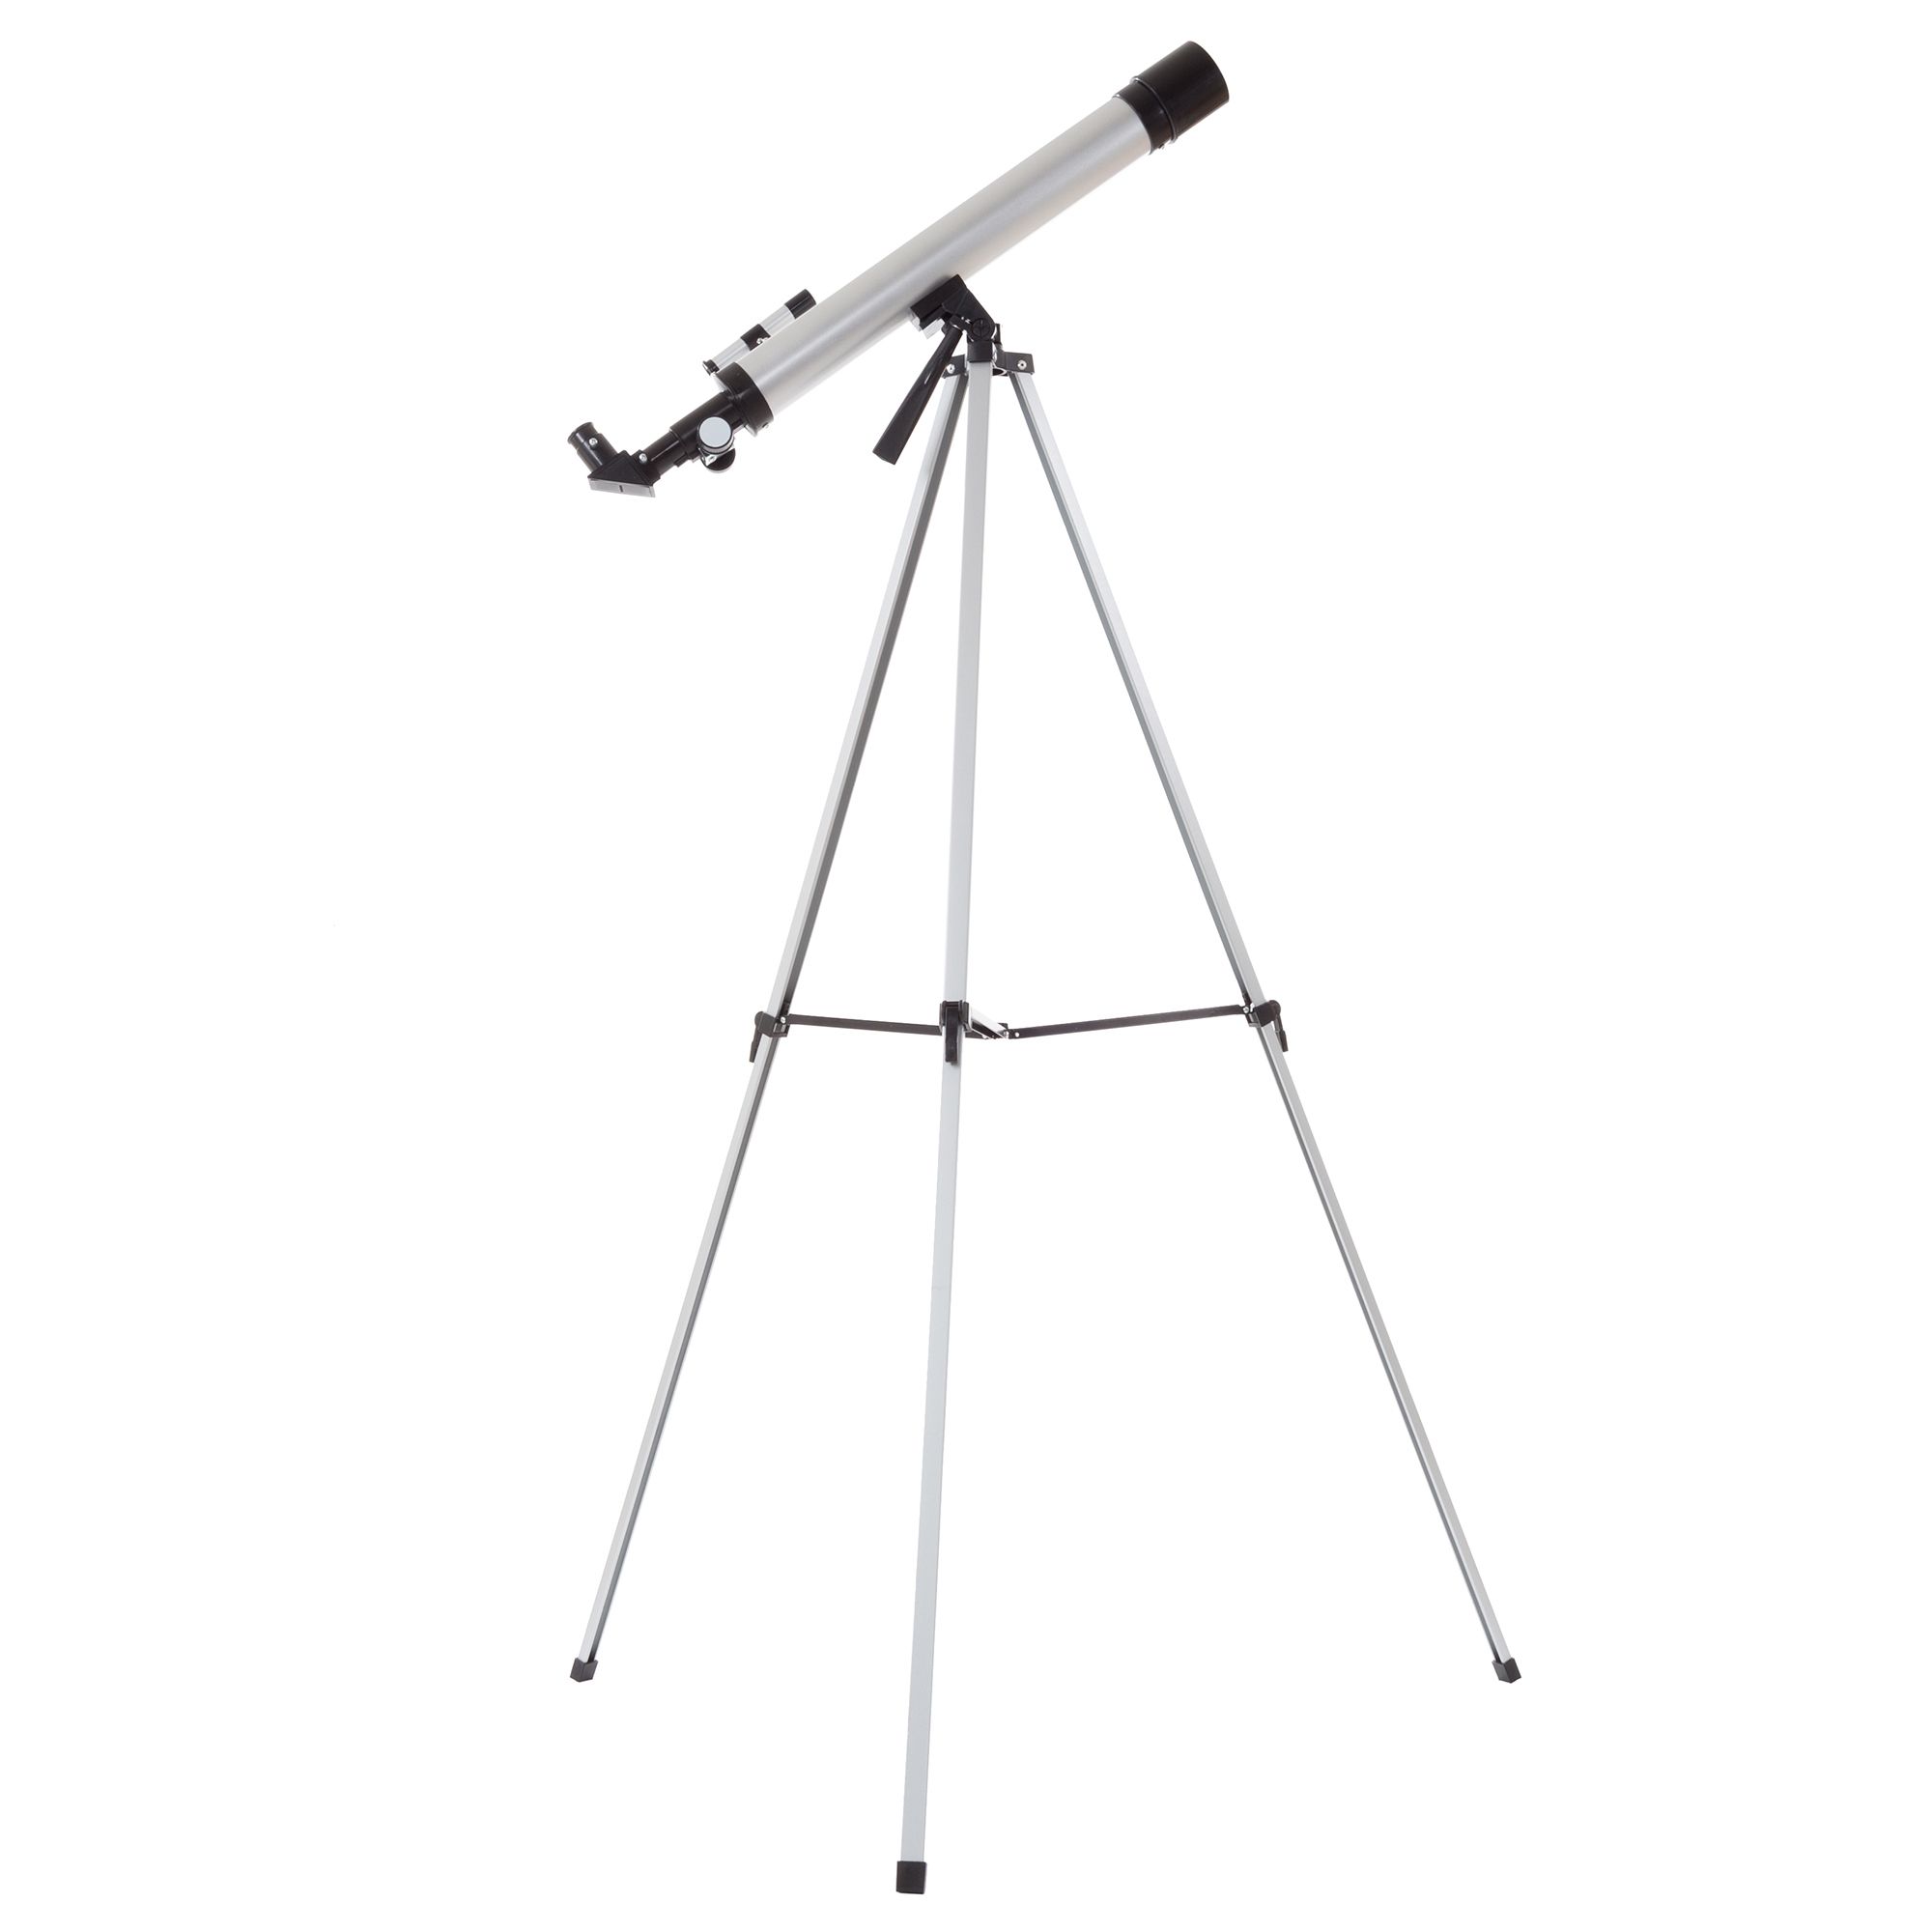 Toy Time 60mm Mirror Refractory Telescope with Tripod